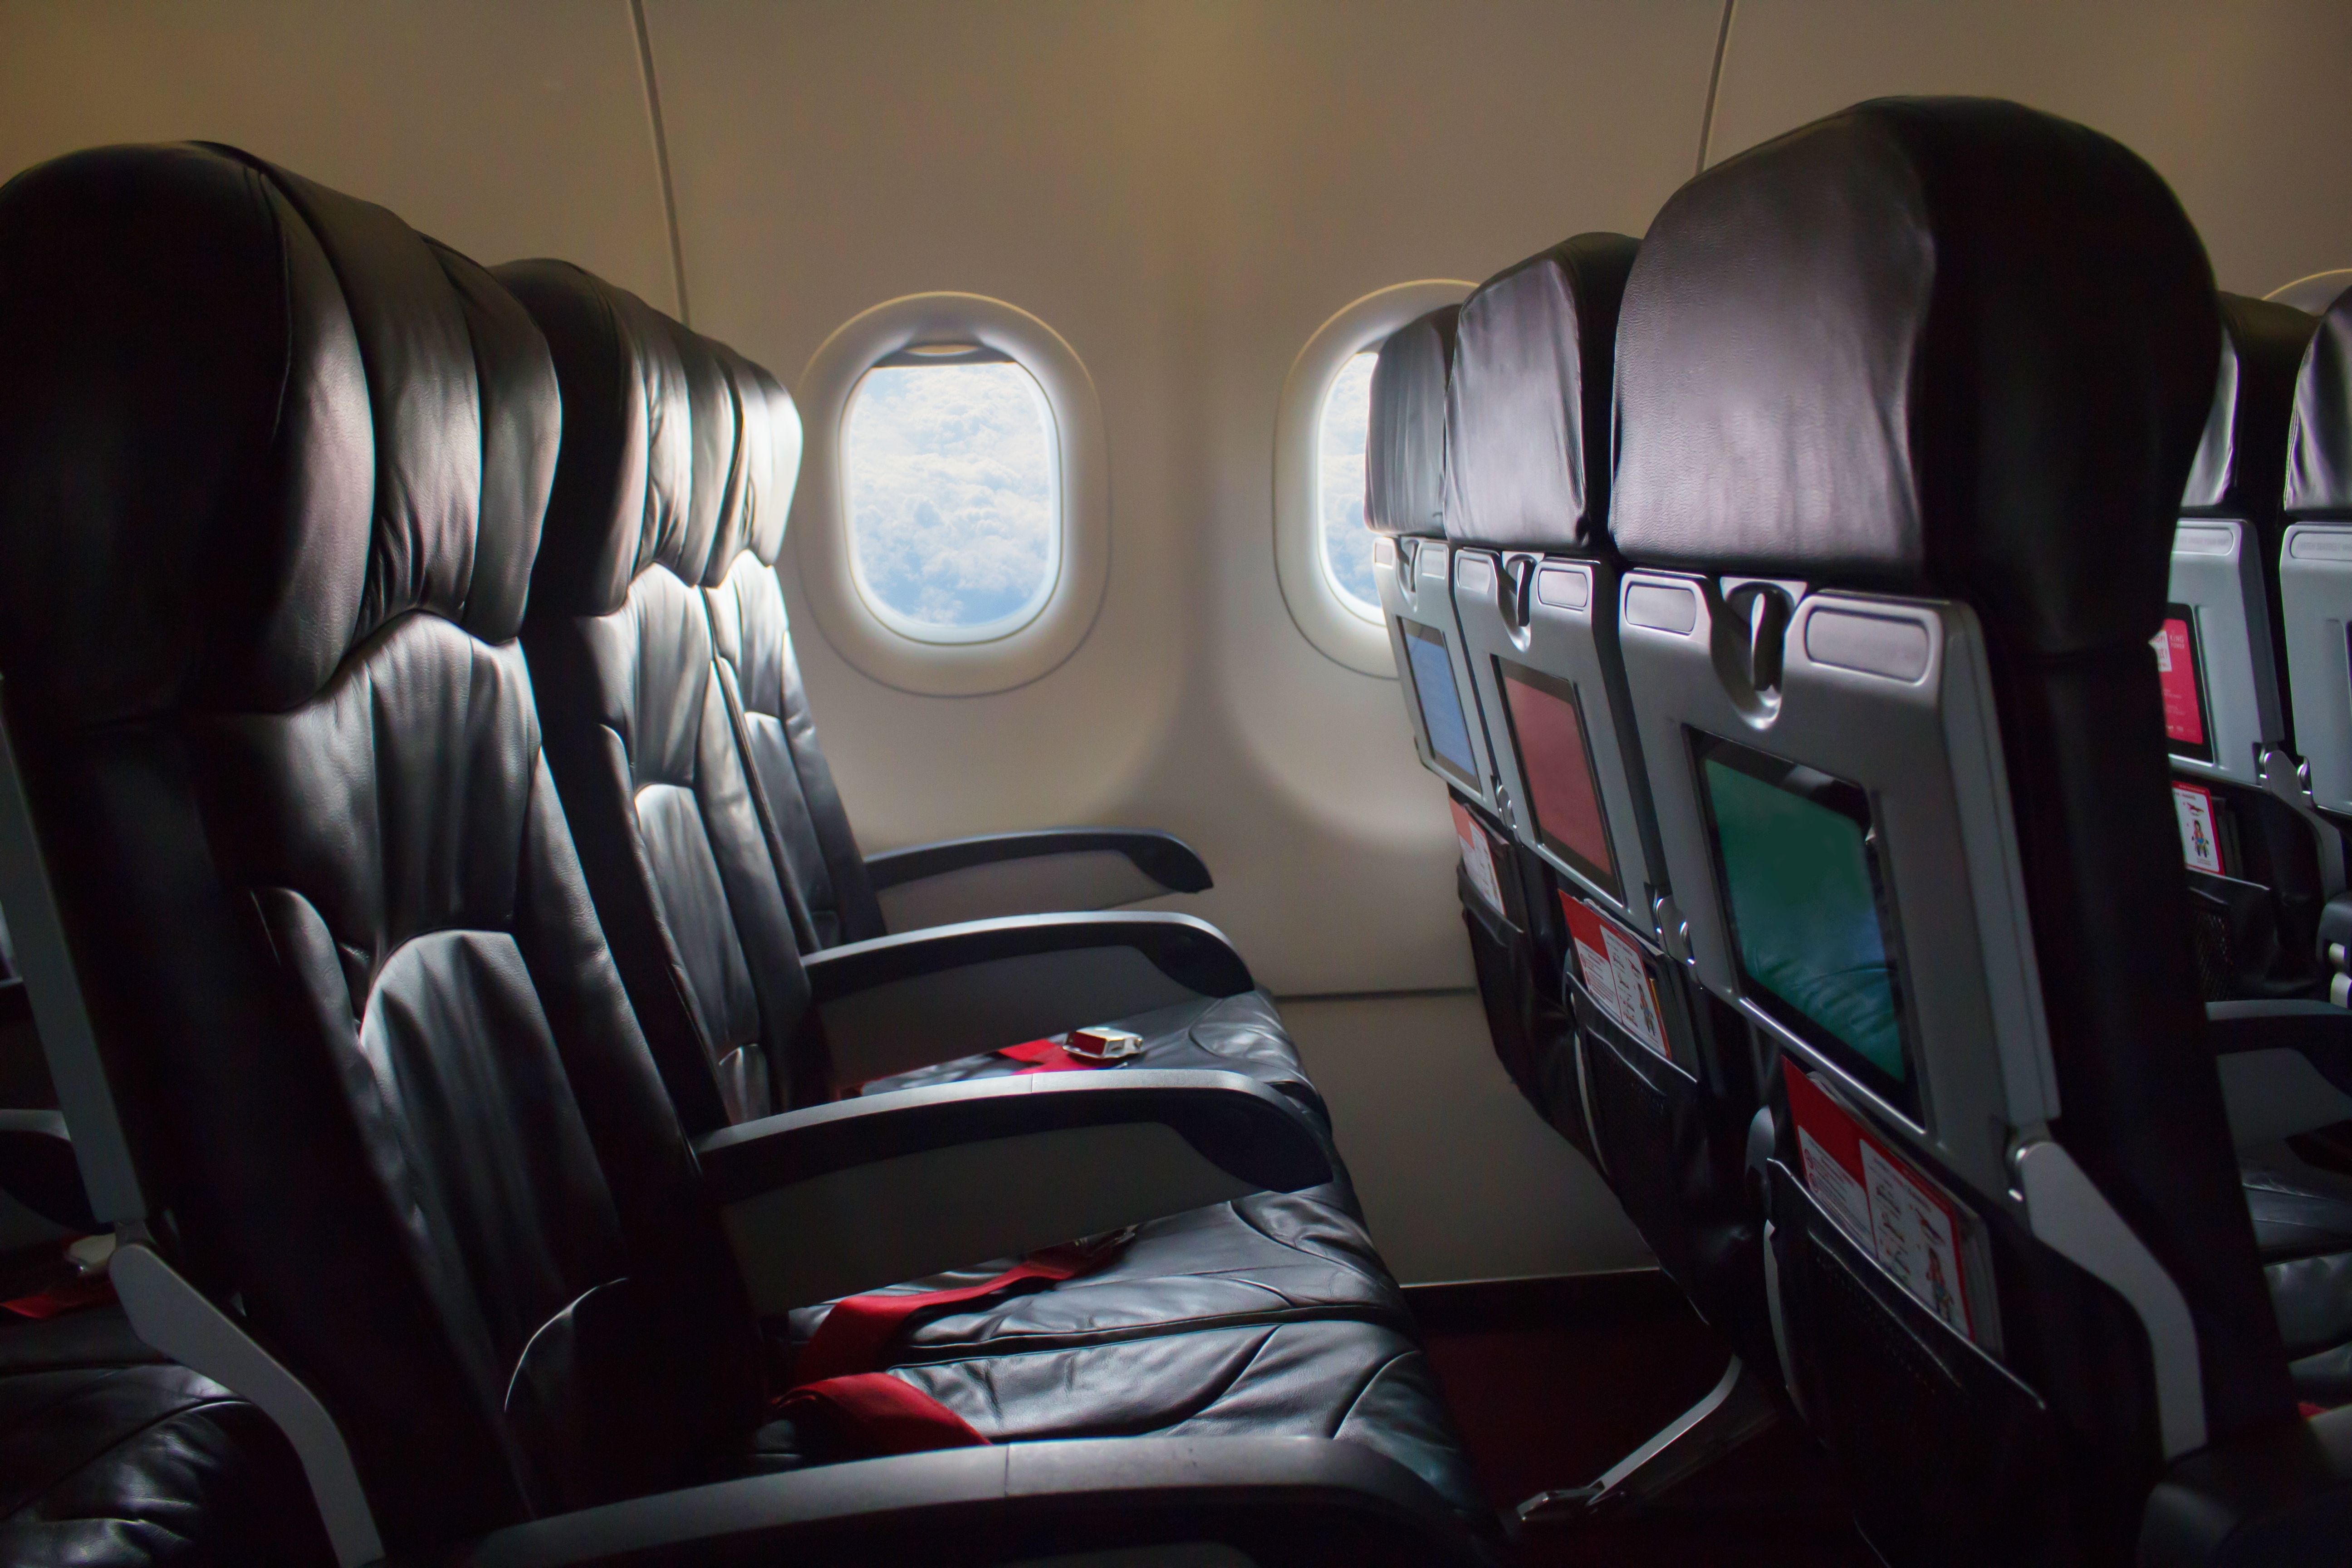 An Empty Row Of Economy Class Seats on an aircraft.